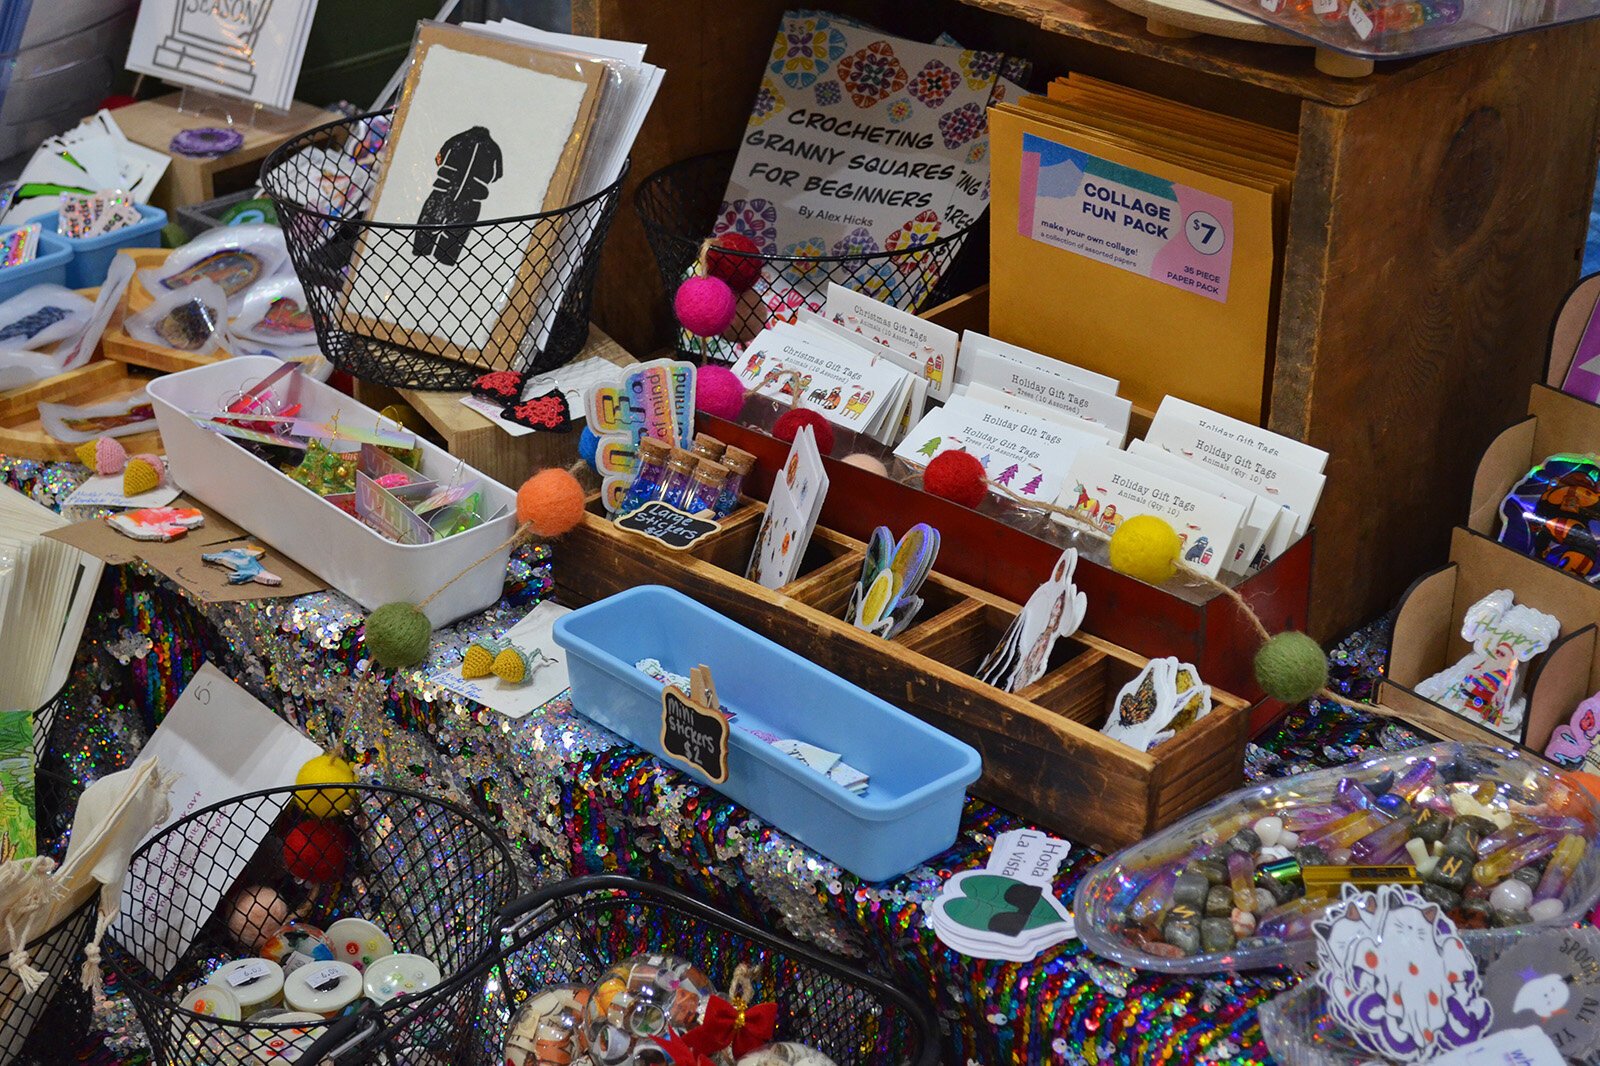 The tables inside Studio 209 were packed with glittering goods ready for bustling holiday shoppers. There were items of all different sizes and price points from prints, stickers, and buttons, to clothing, paintings, jewelry, and even furniture. 